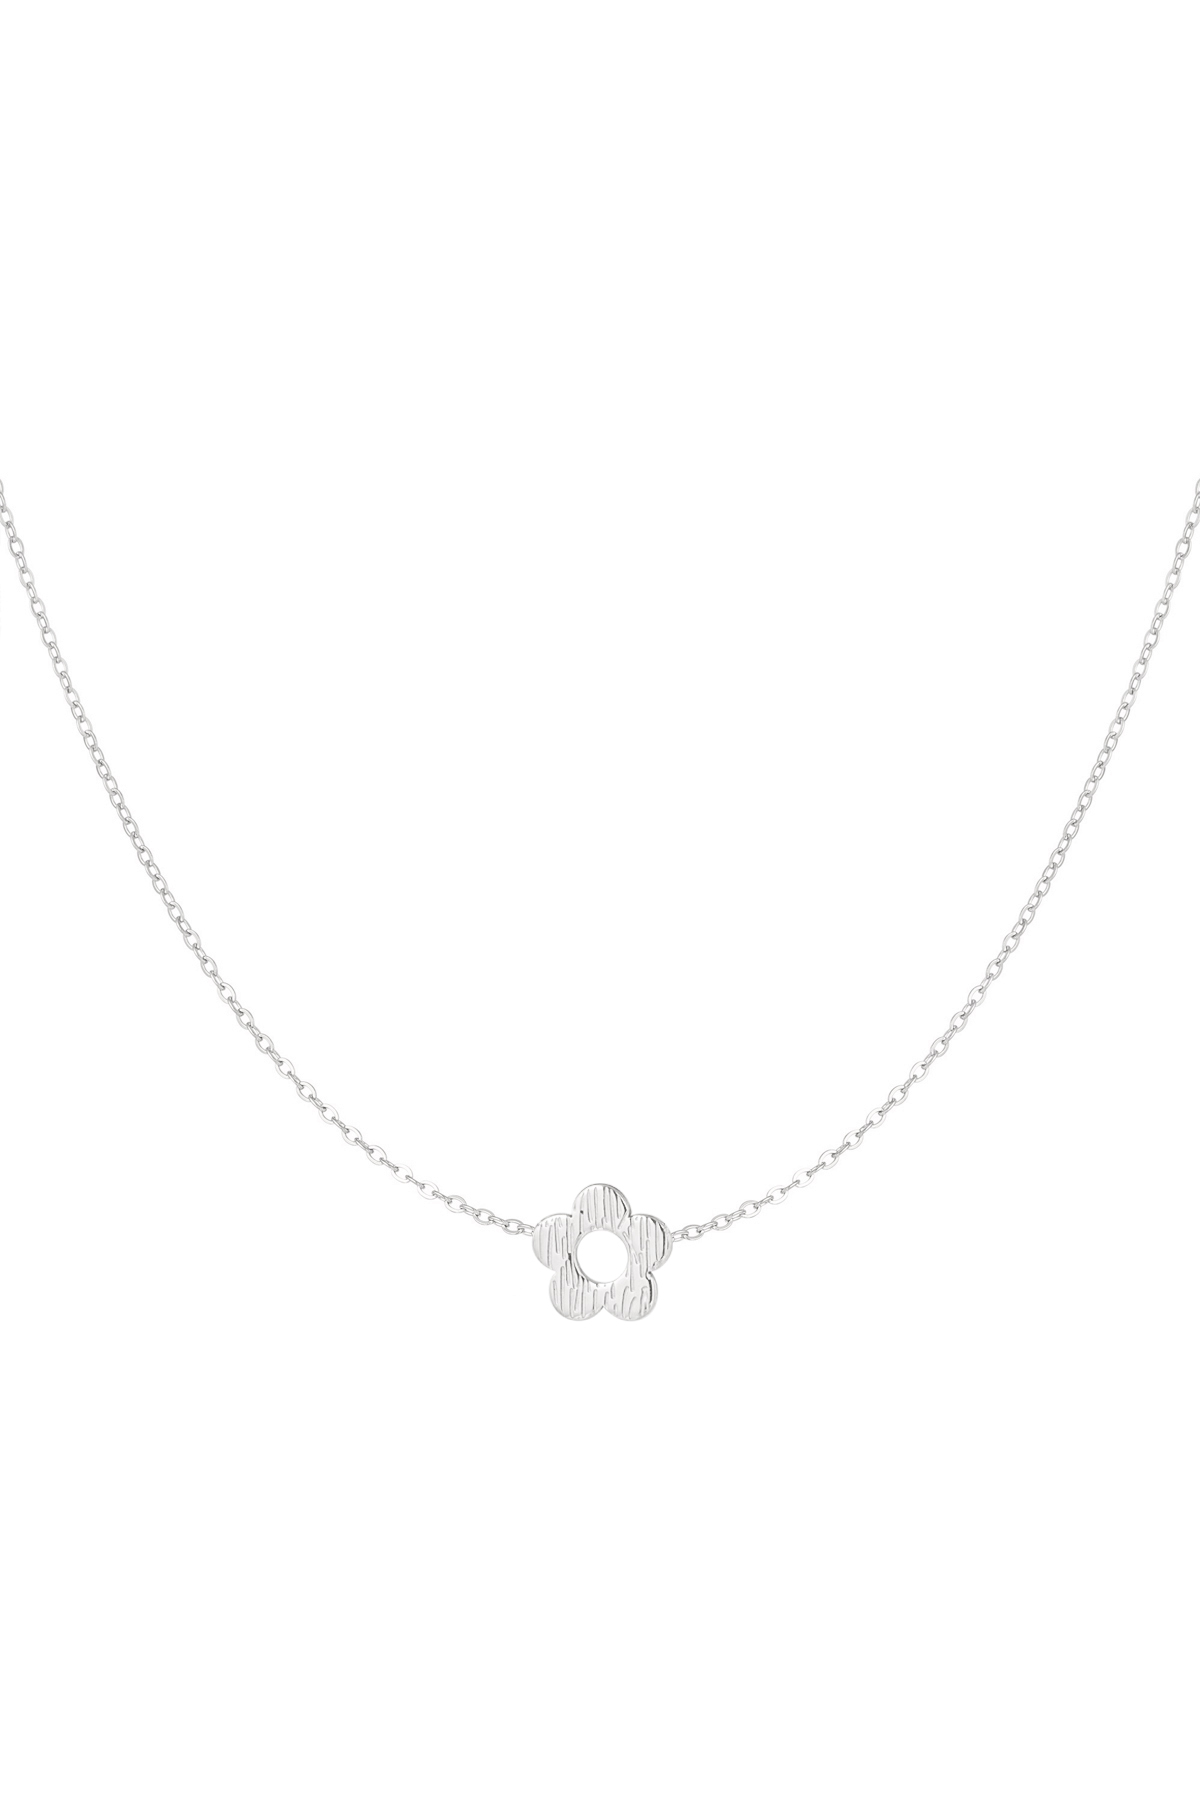 Spring flower necklace - silver